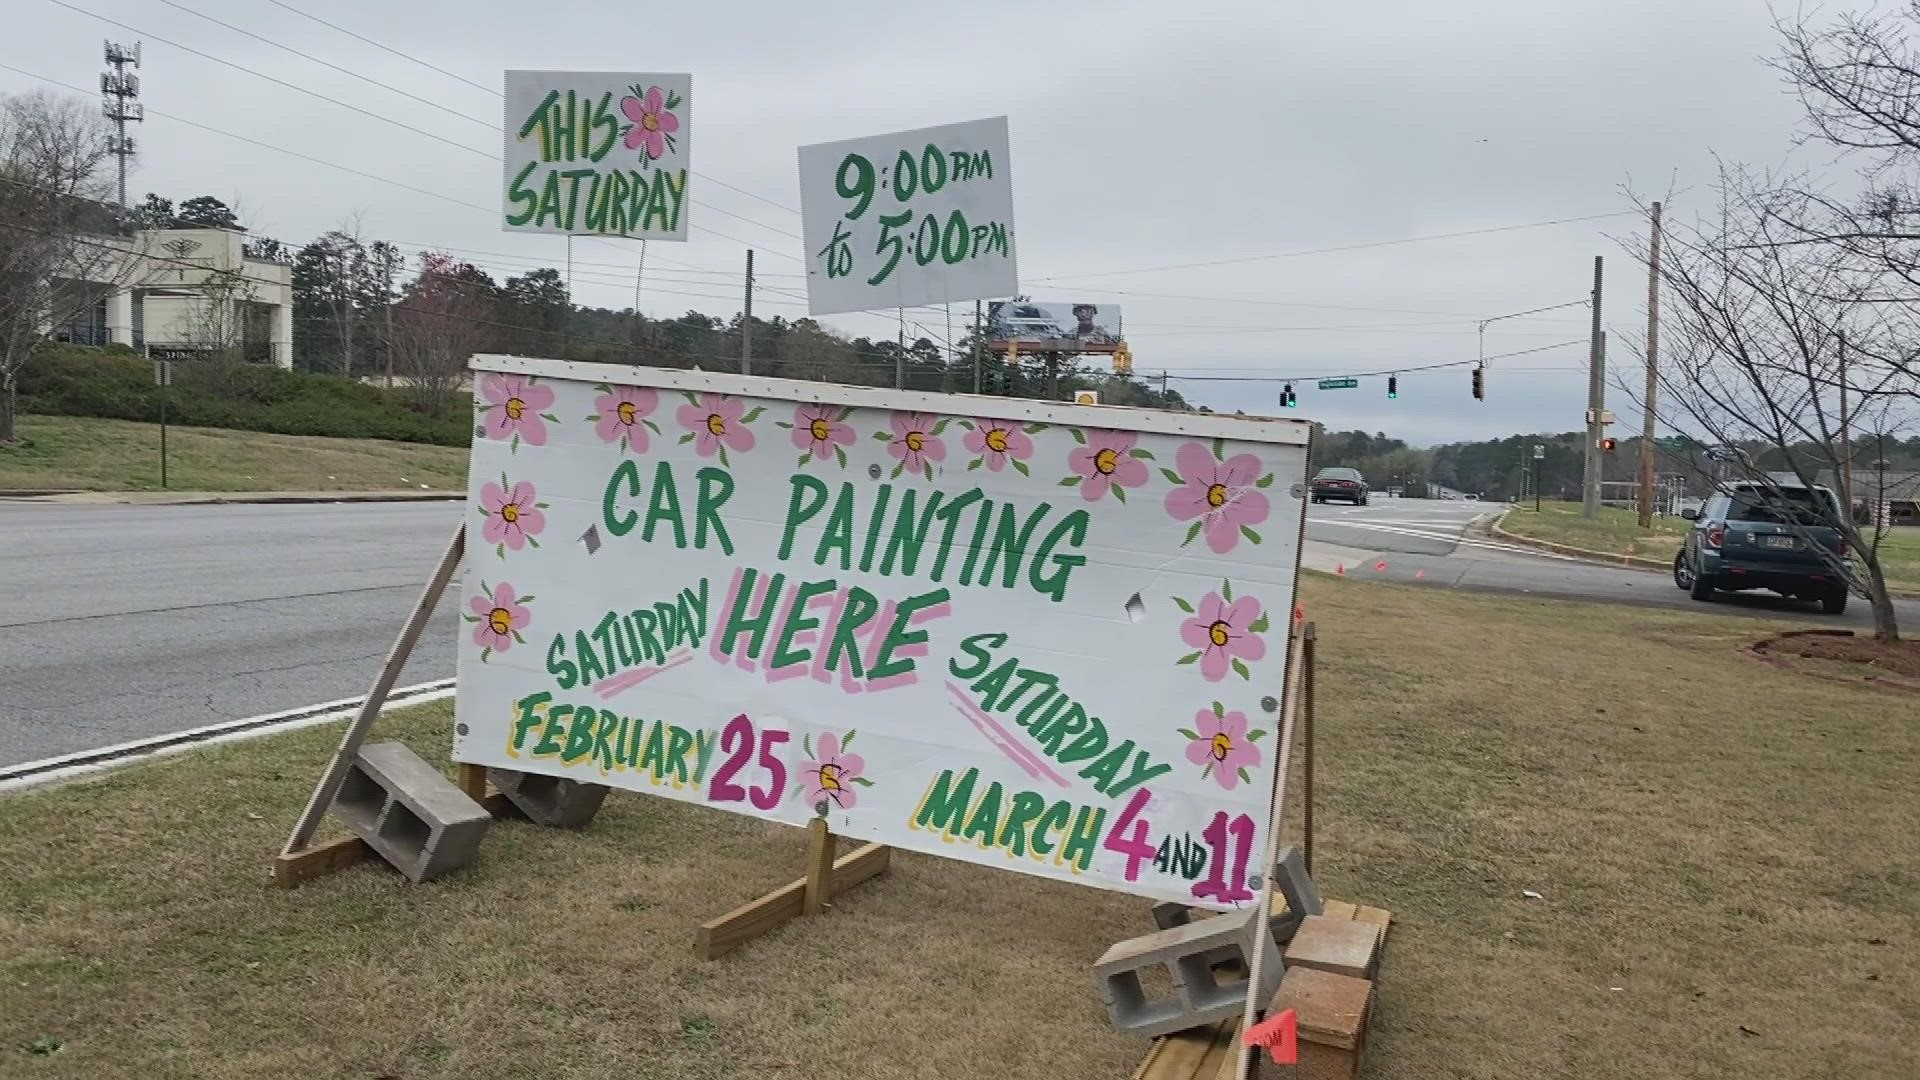 Folks could get their car painted on Saturday from 9 a.m. to 5 p.m.